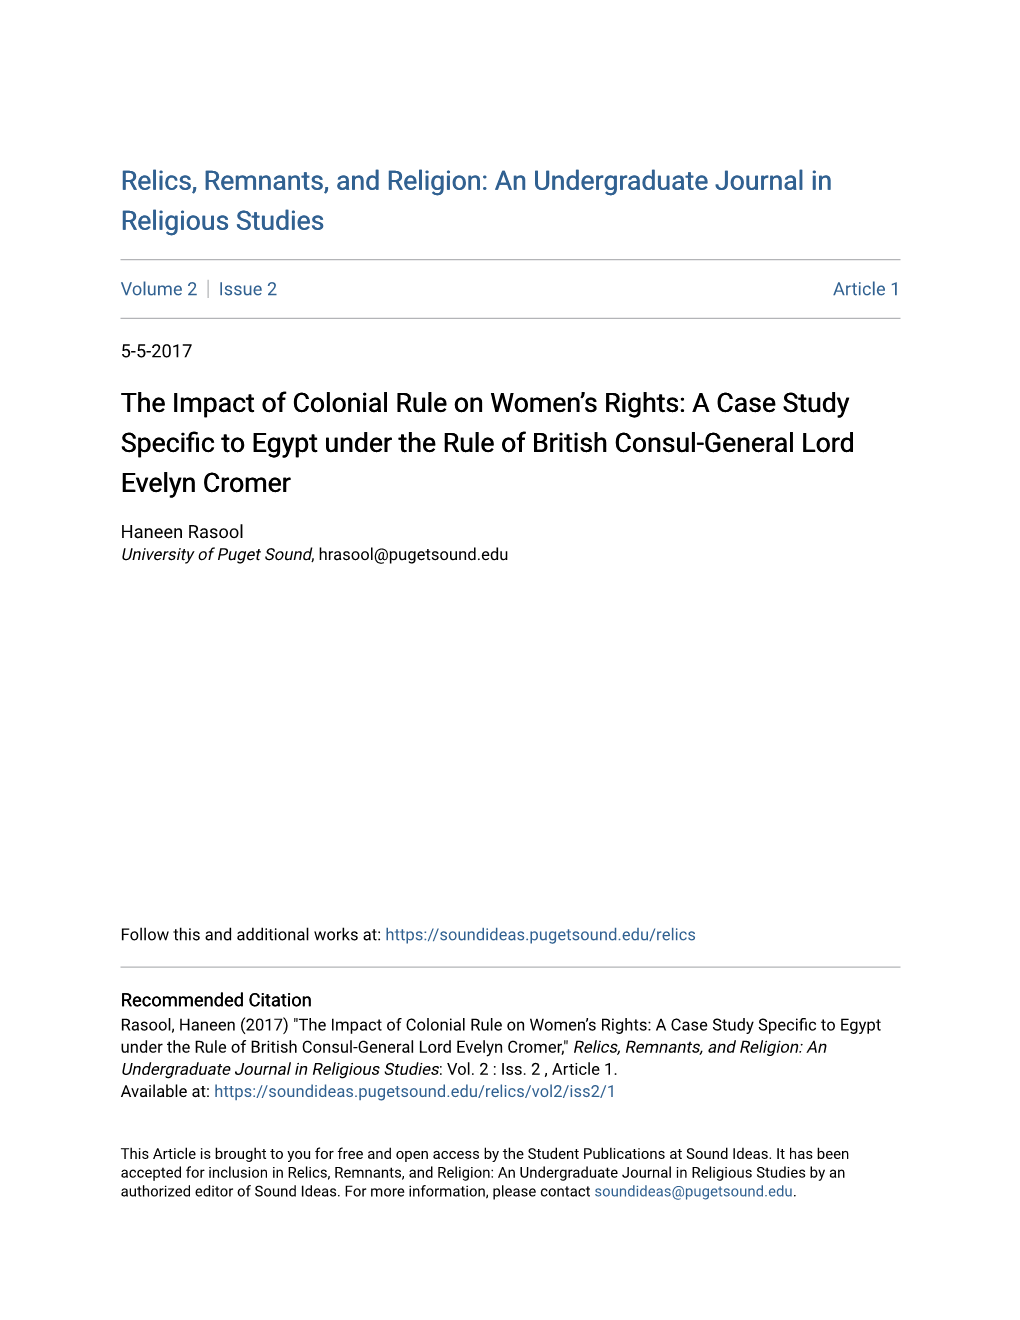 The Impact of Colonial Rule on Women's Rights